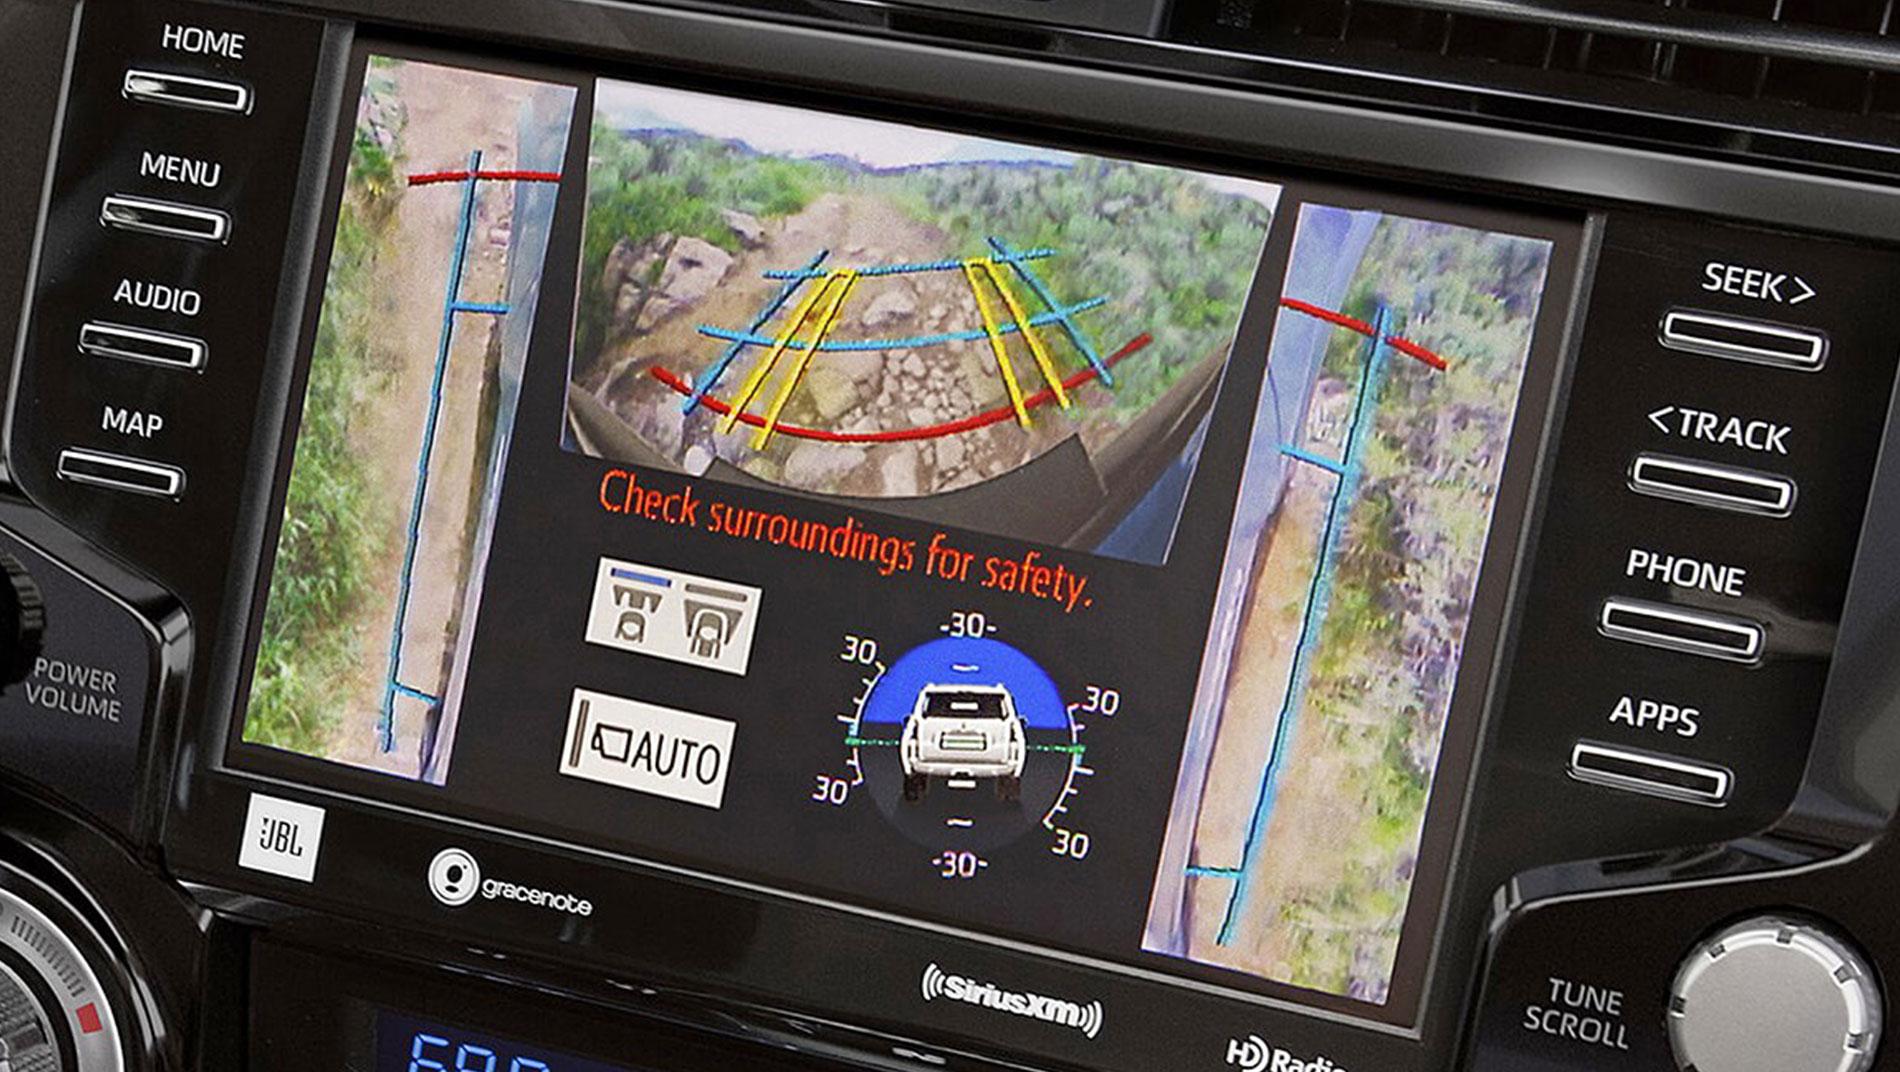 Toyota backup assist with large touch screen